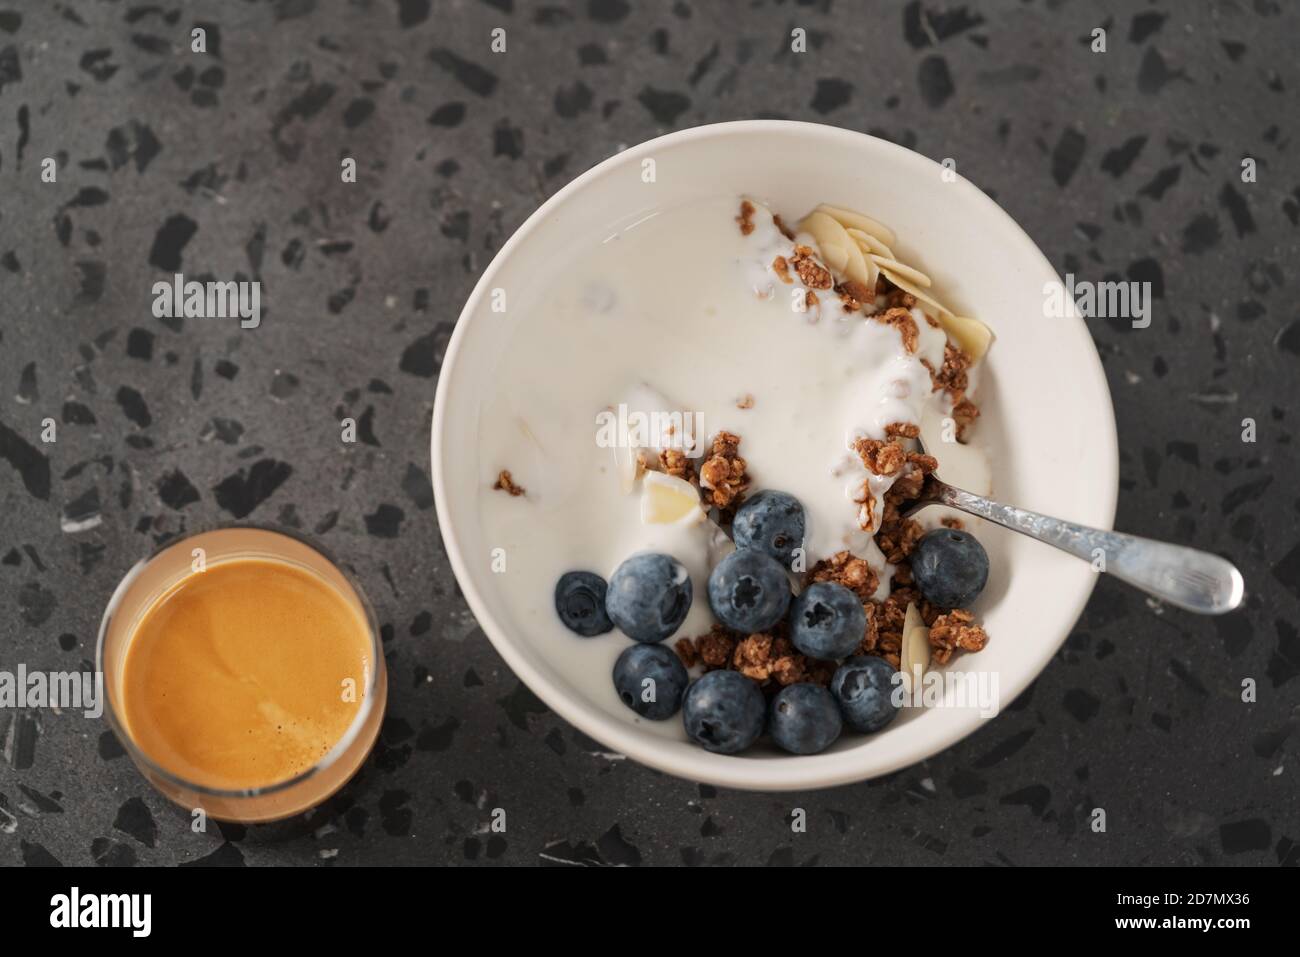 Healthy breakfast with whole grain granola and fresh blueberries in white bowl with coffee on concrete background, shallow focus Stock Photo